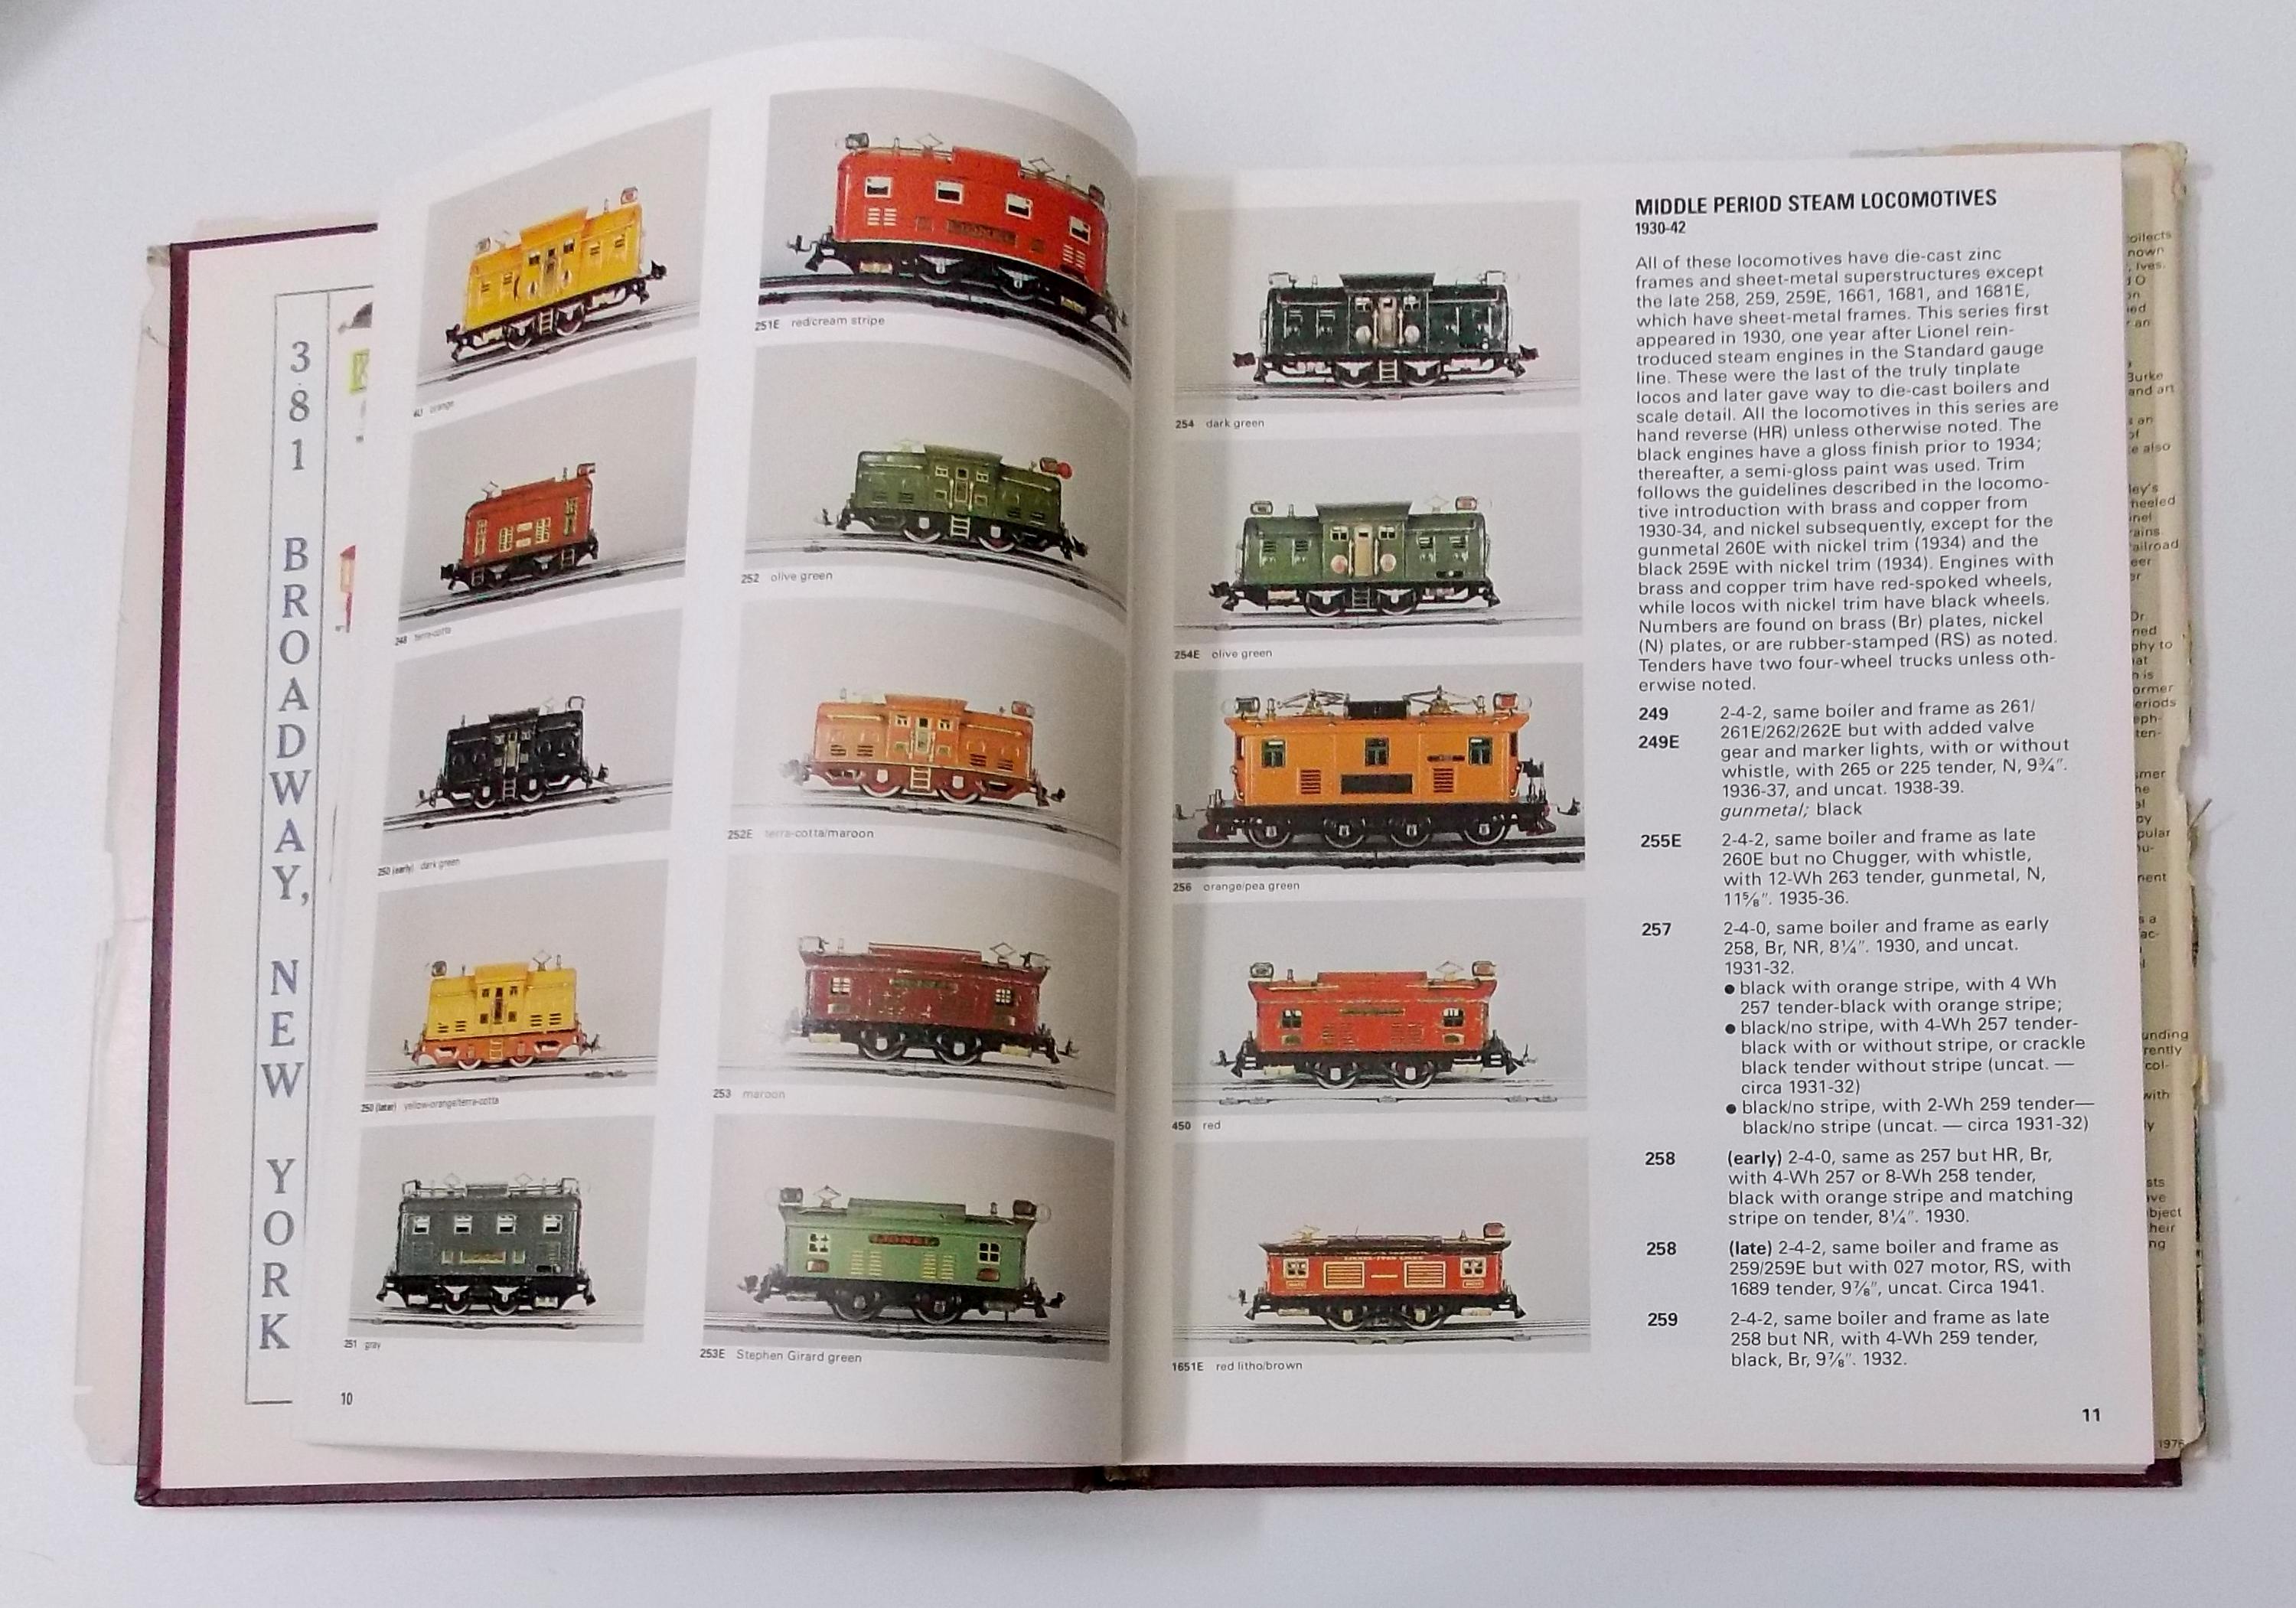 1976 "Lionel Train: Standard of the World" Price Guide Book by Donald Fraley